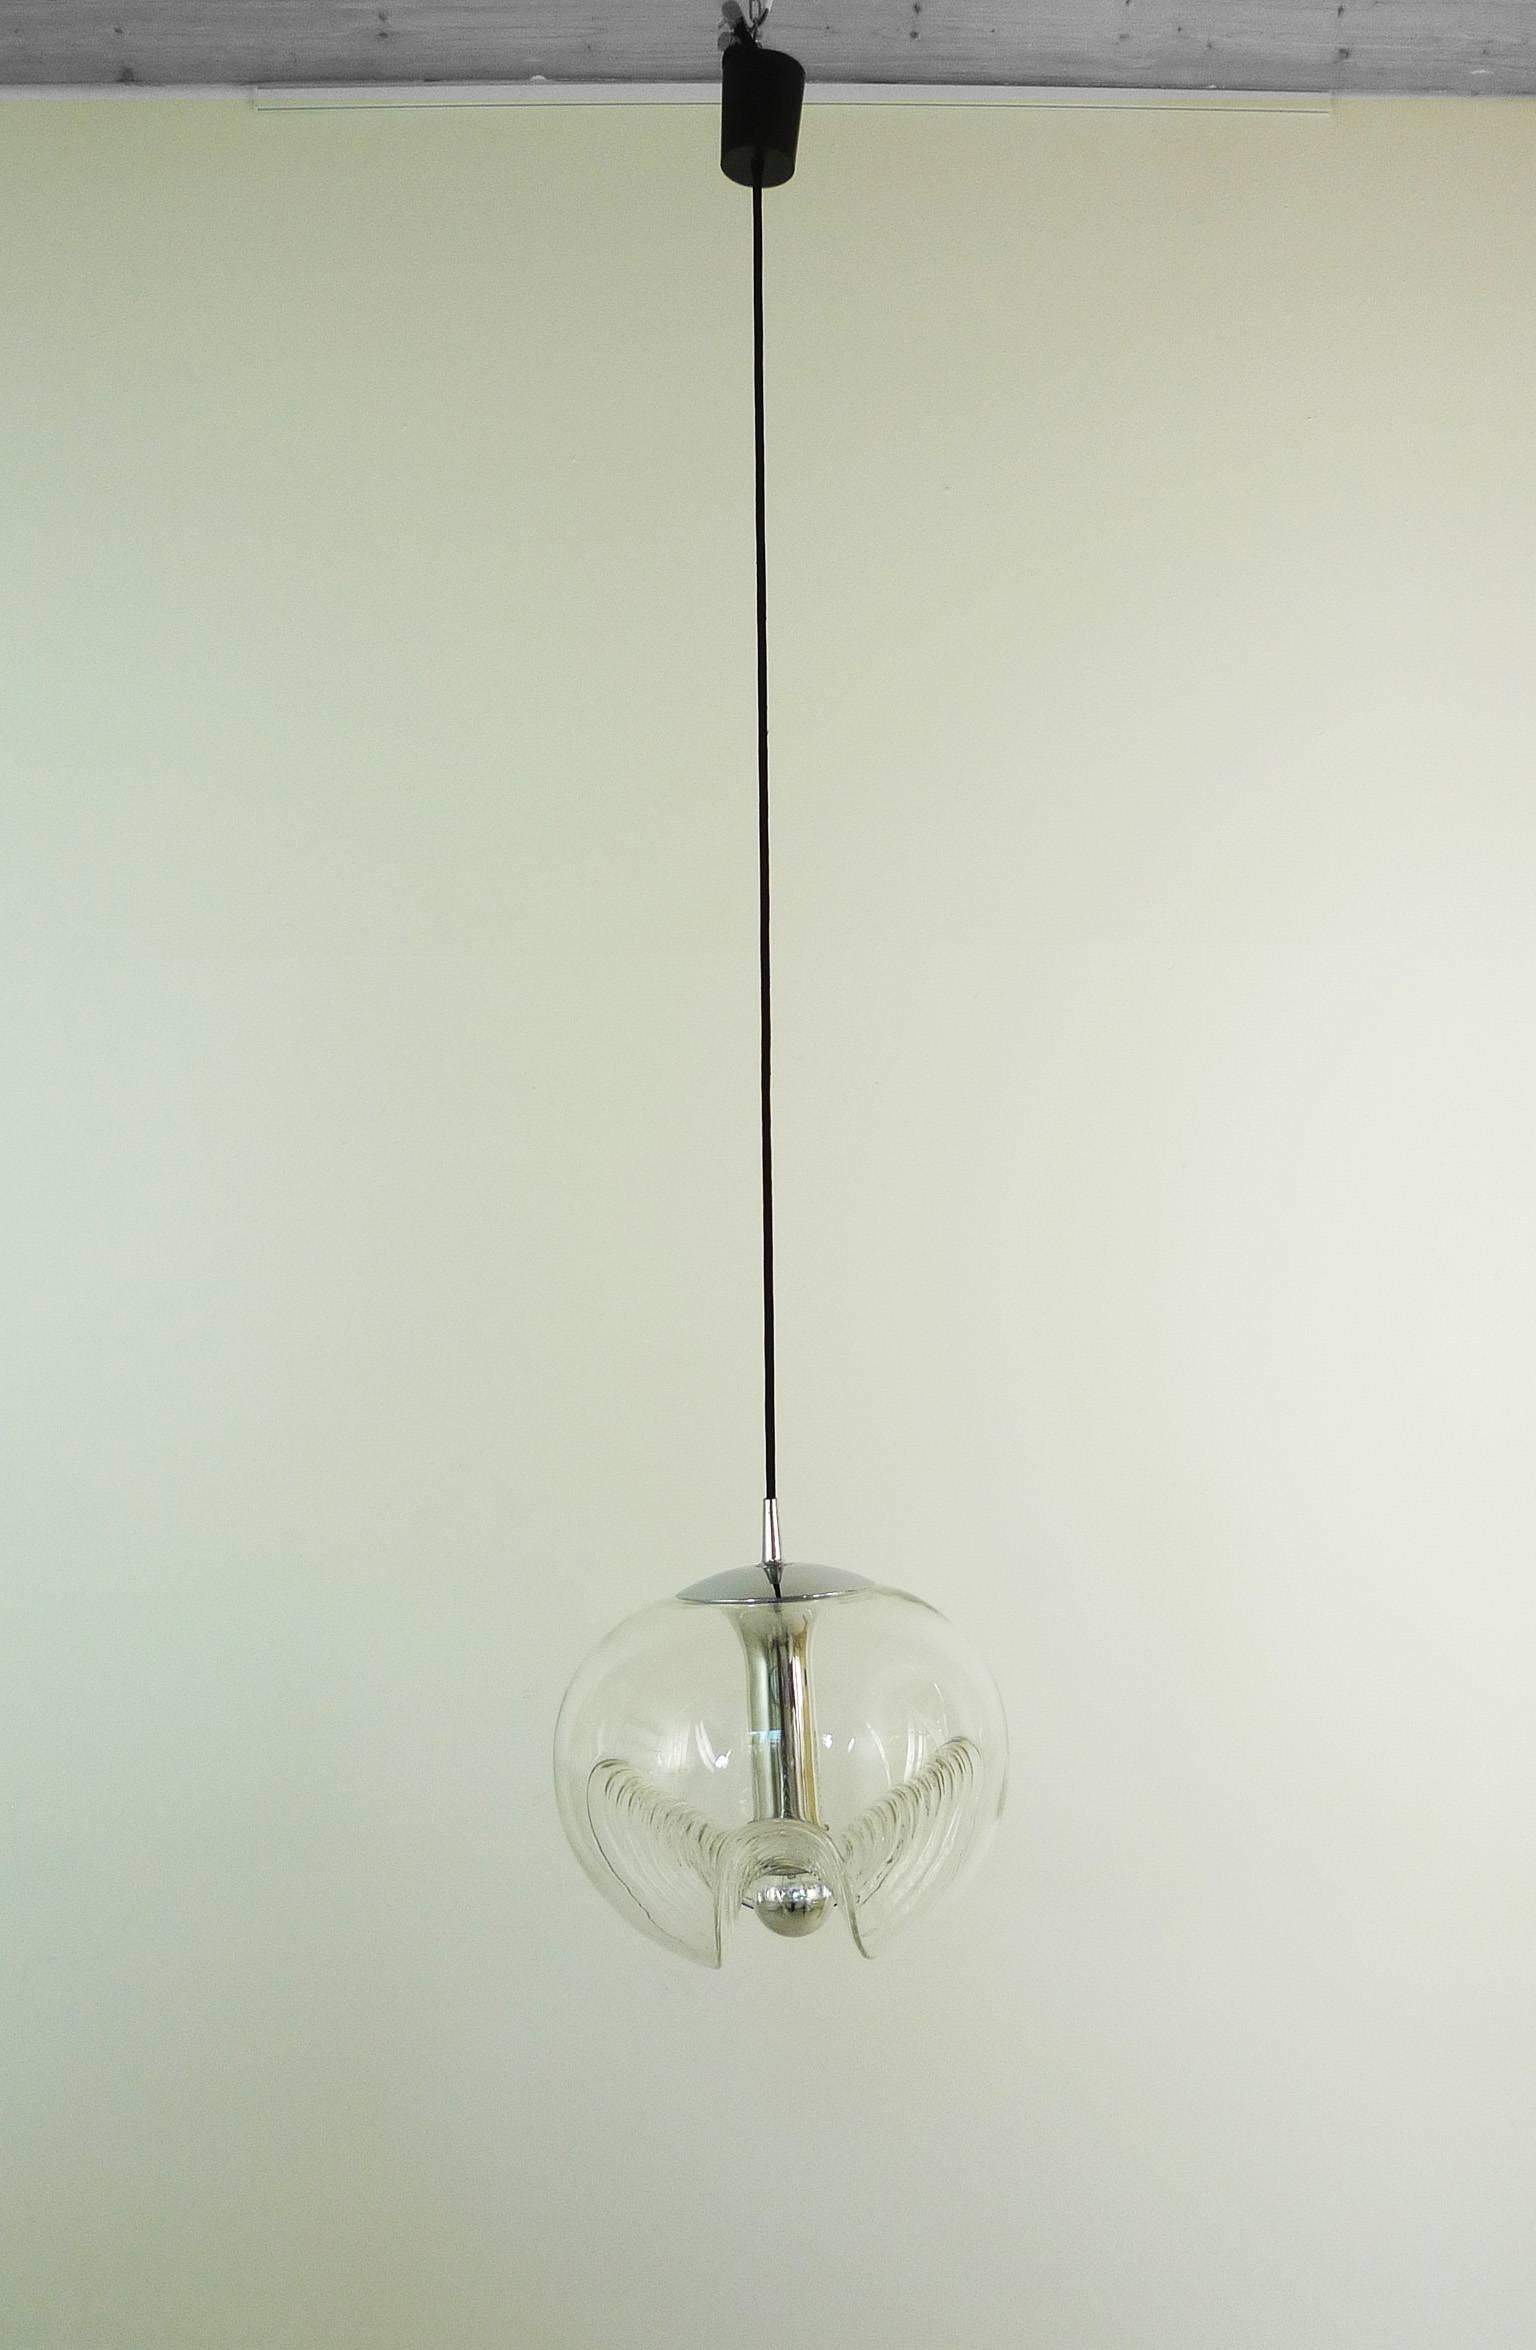 This pendant was designed by Koch and Lowy for the German manufacturer Peill & Putzler in the 1970s. It's thick clear glass body is significantly waved for an interesting light spreading.
The ceiling lamp has an E 27 socket and it is wired for